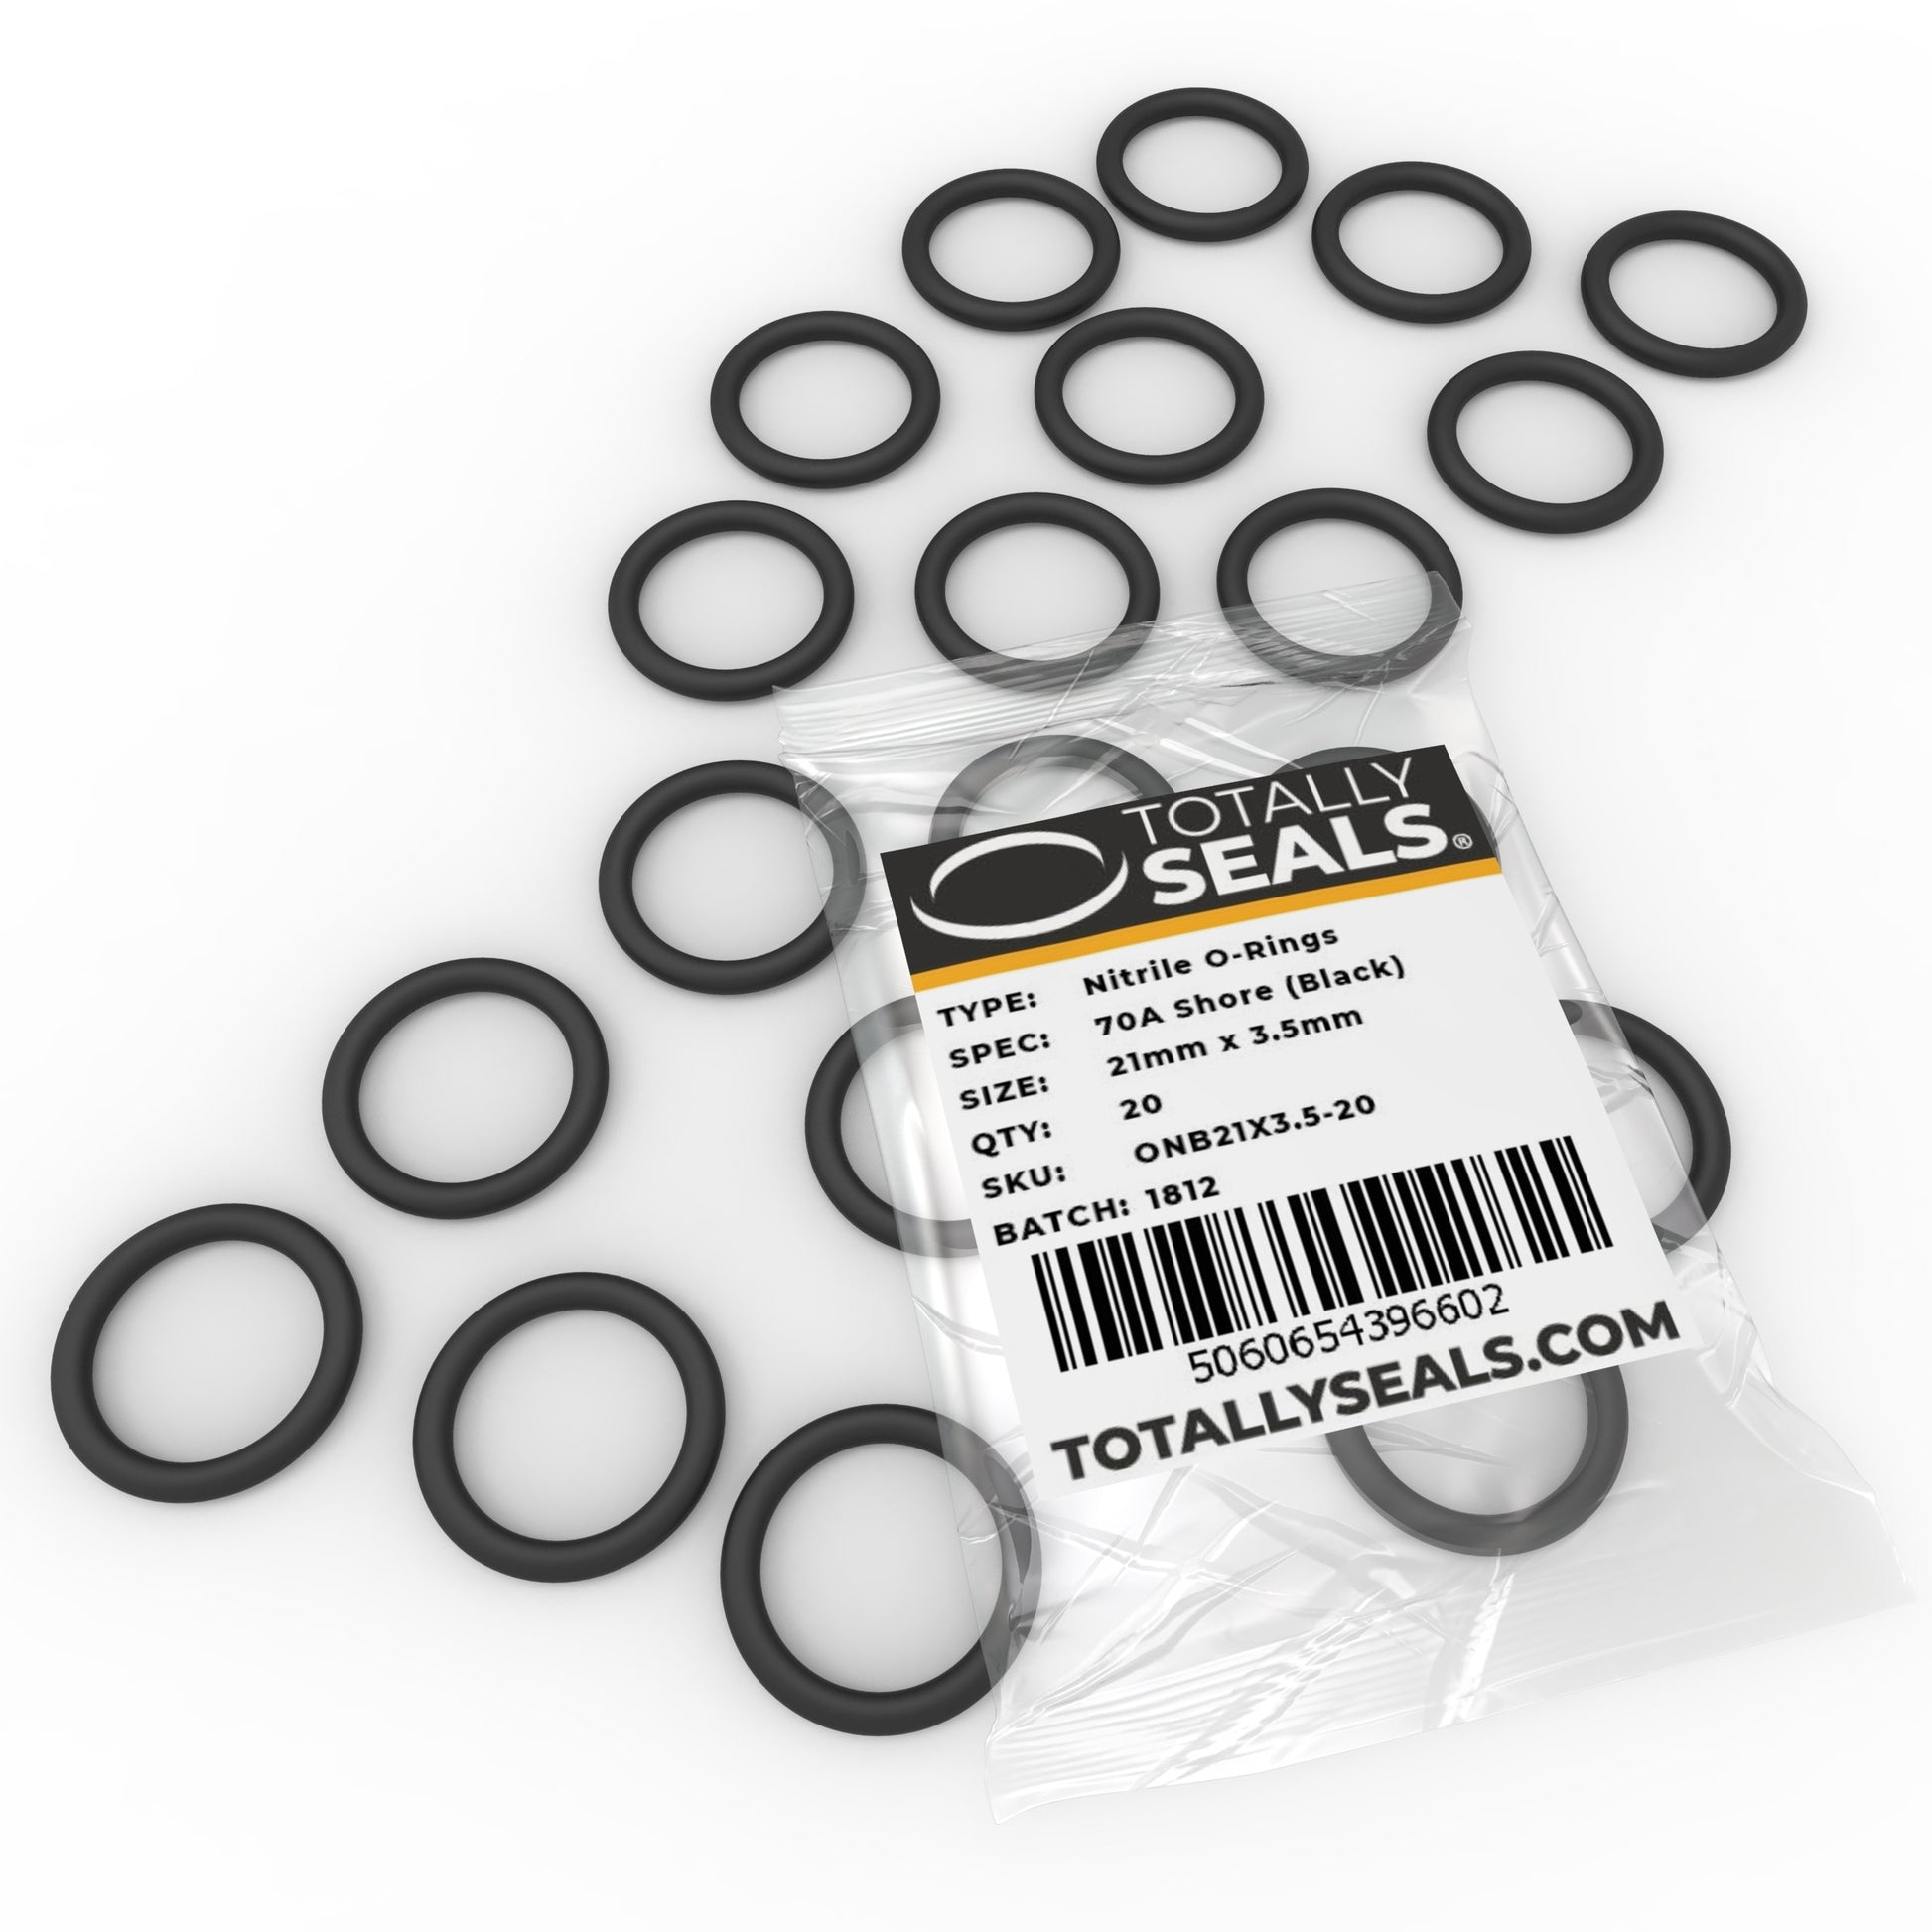 21mm x 3.5mm (28mm OD) Nitrile O-Rings - Totally Seals®